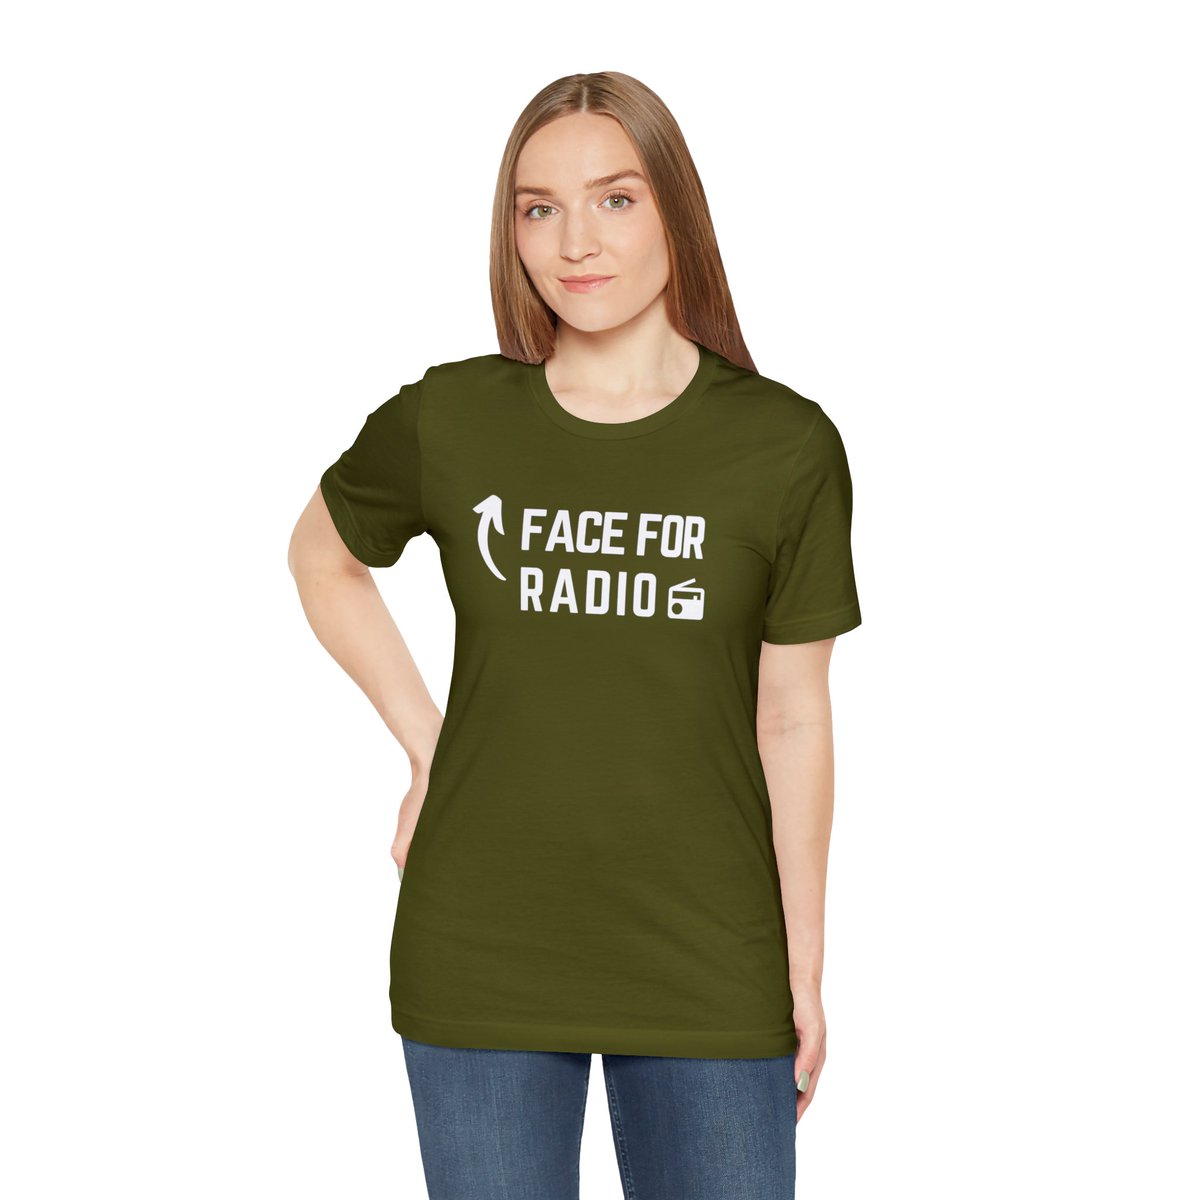 Our t-shirts now go up to size 5x! 😍 bit.ly/faceforradiotee